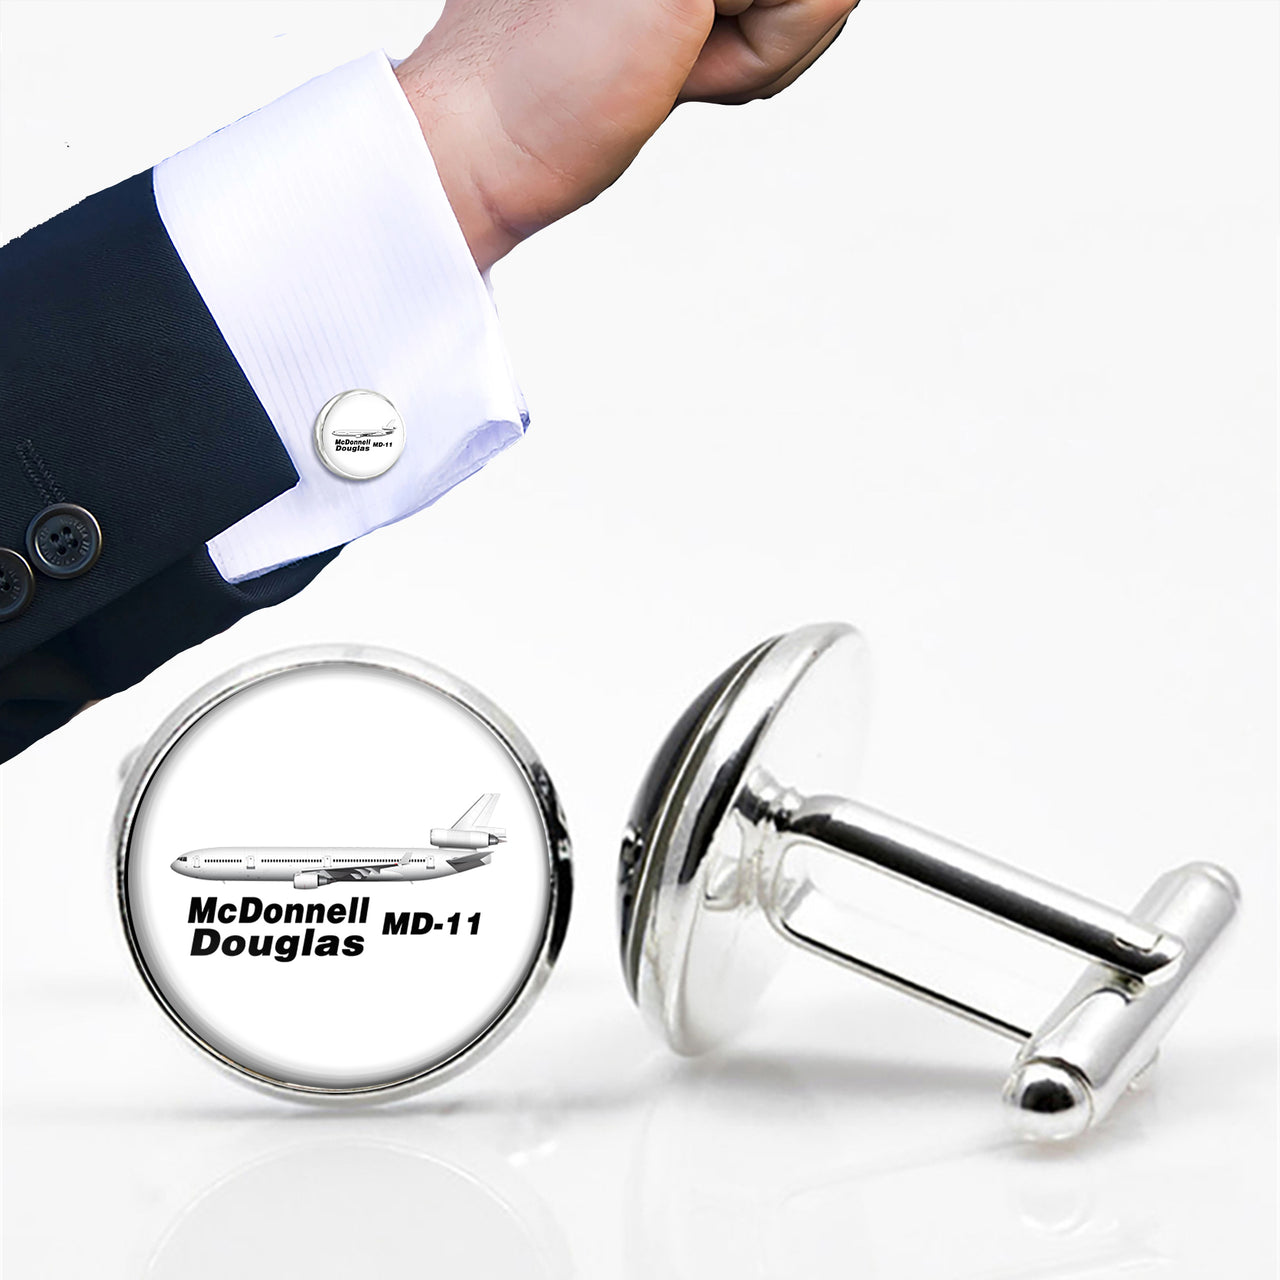 The McDonnell Douglas MD-11 Designed Cuff Links